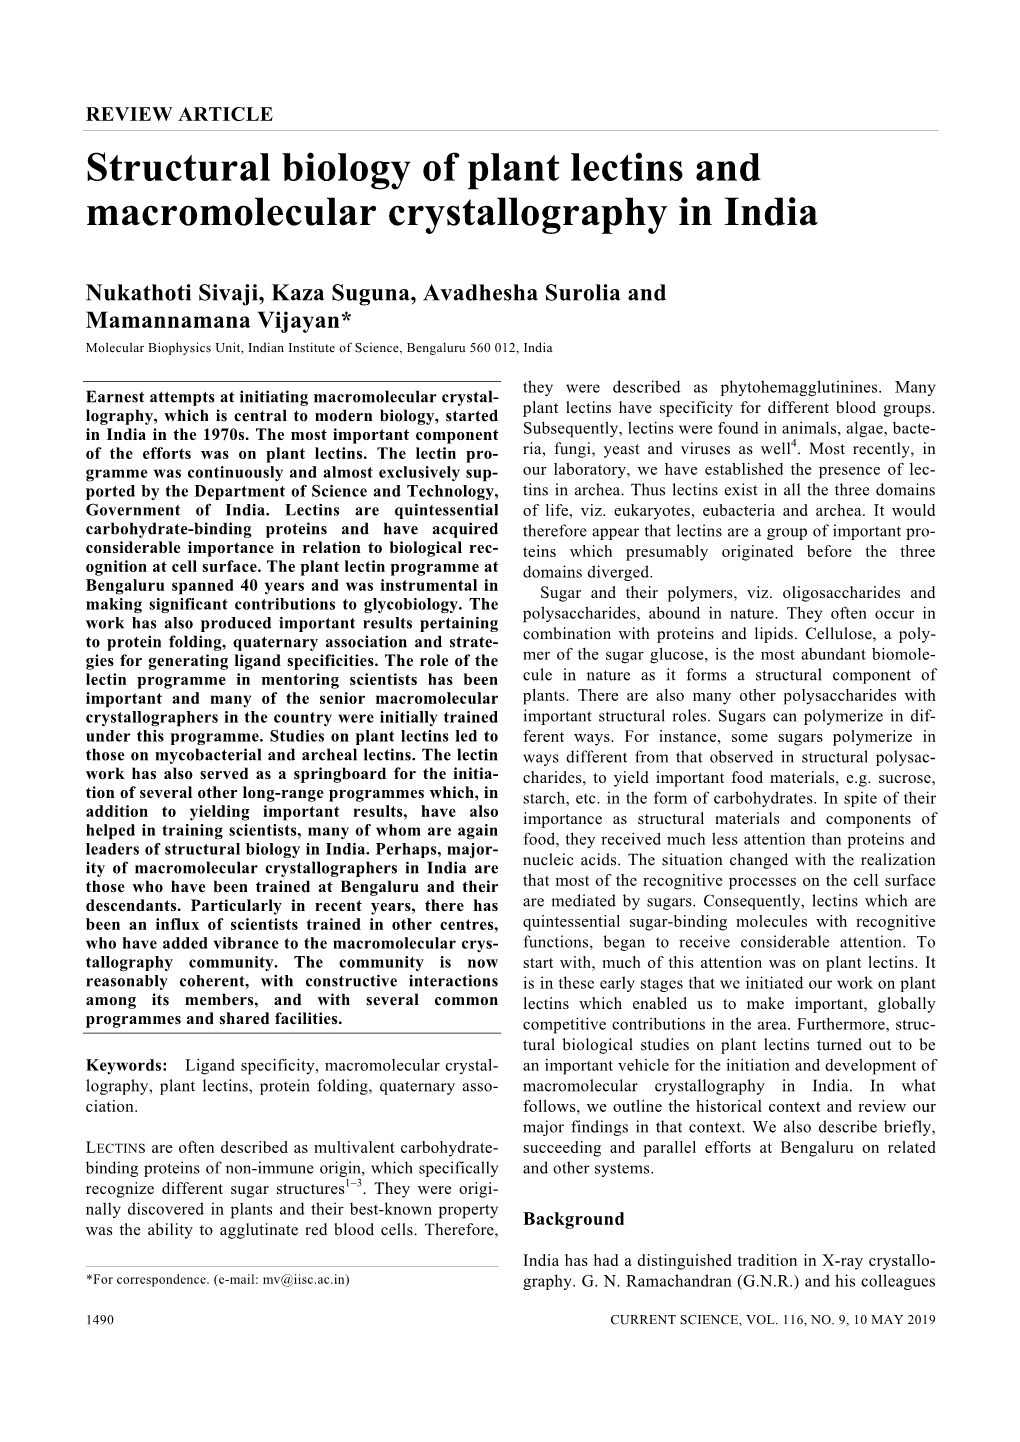 Structural Biology of Plant Lectins and Macromolecular Crystallography in India